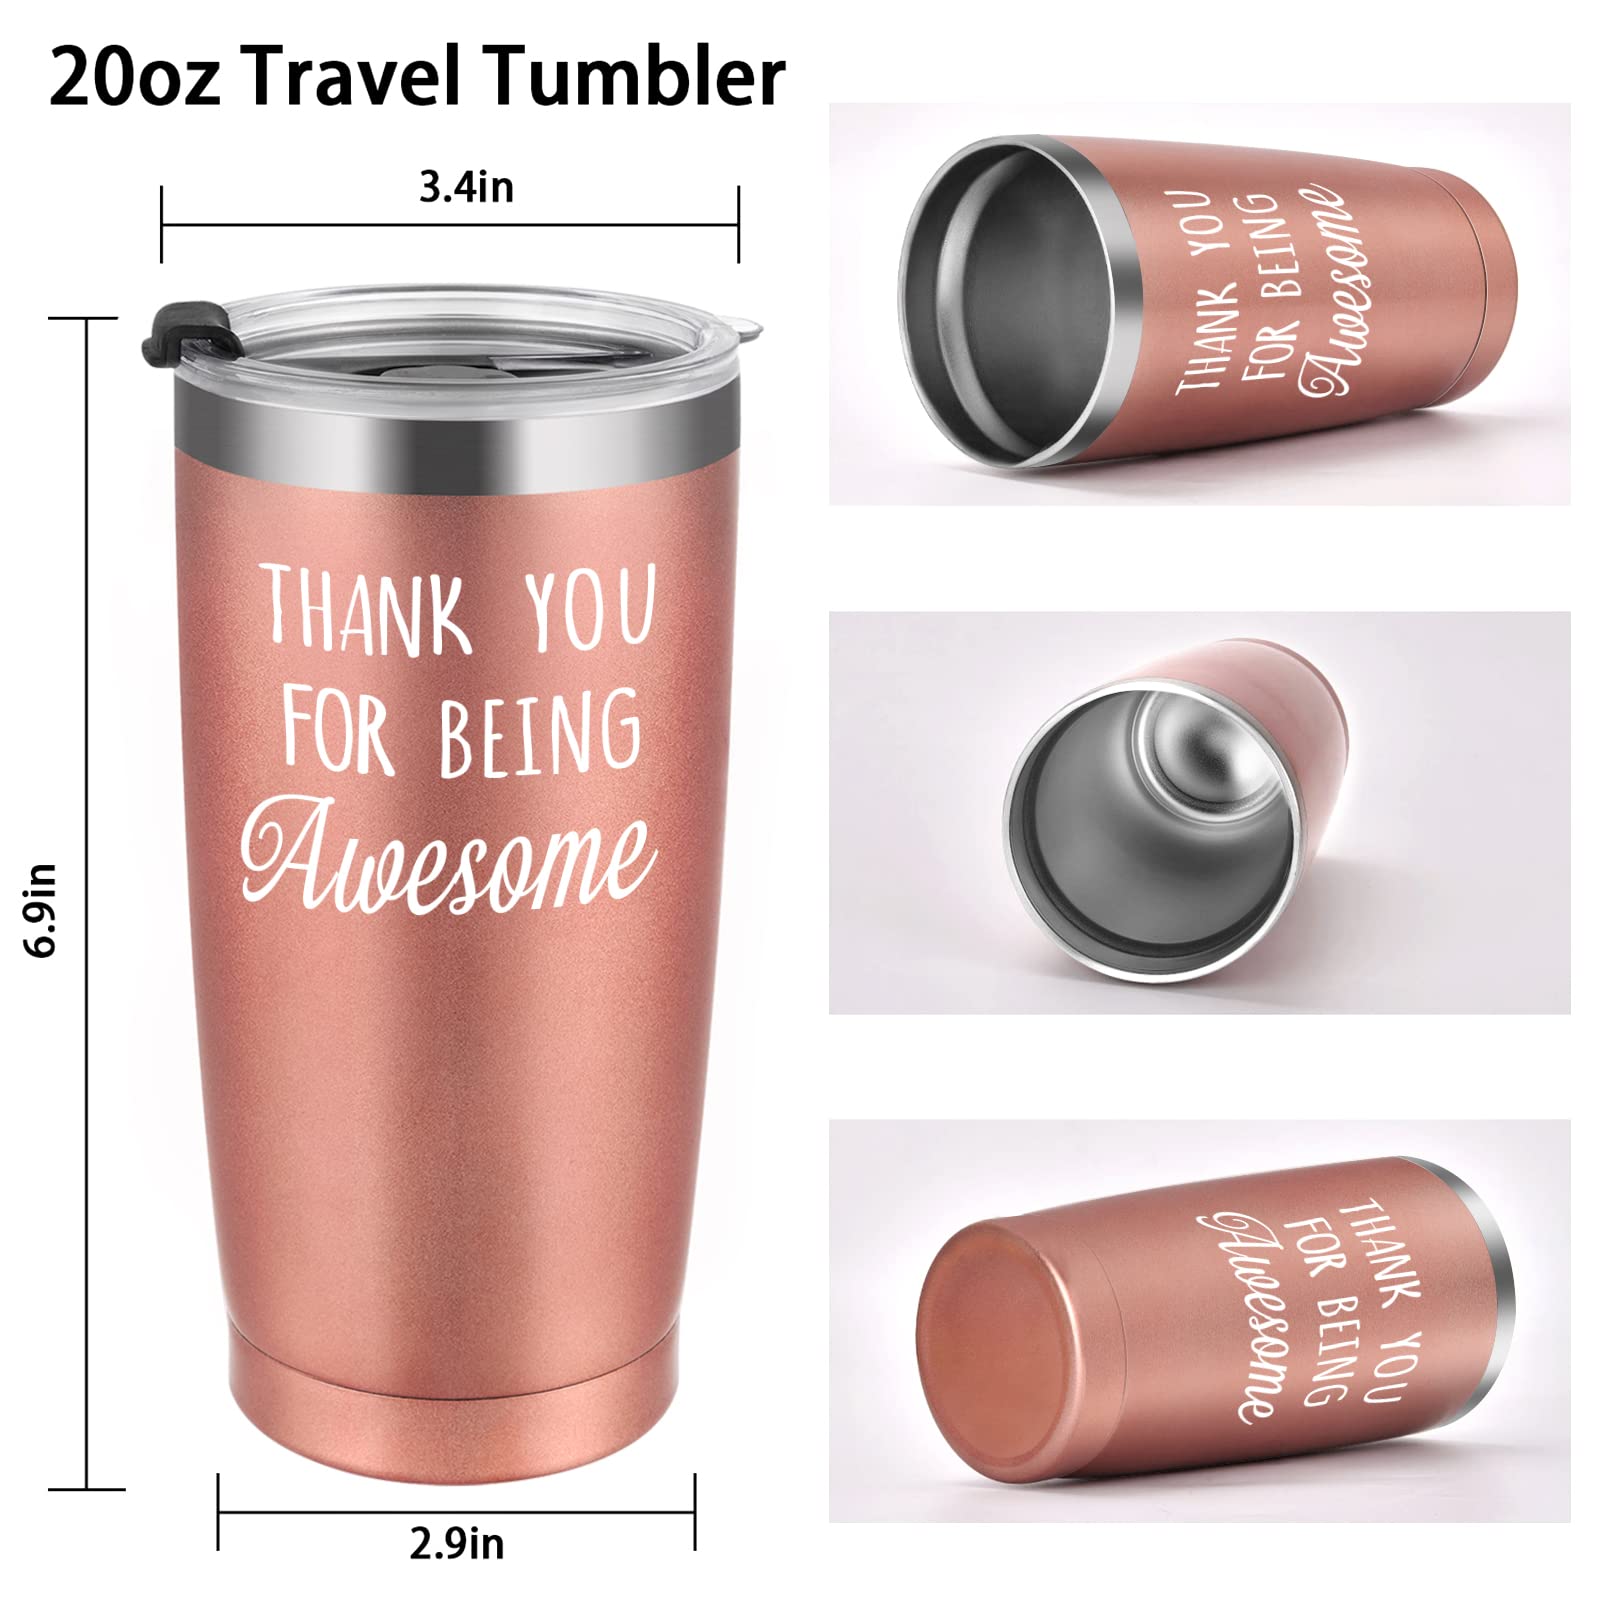 Gtmileo Thank You Gifts, 4 Pack Thank You For Being Awesome Stainless Steel Insulated Travel Tumbler, Appreciation Christmas Gifts for Women Men Coworker Teacher Employee Friends(20oz, Multi Color)